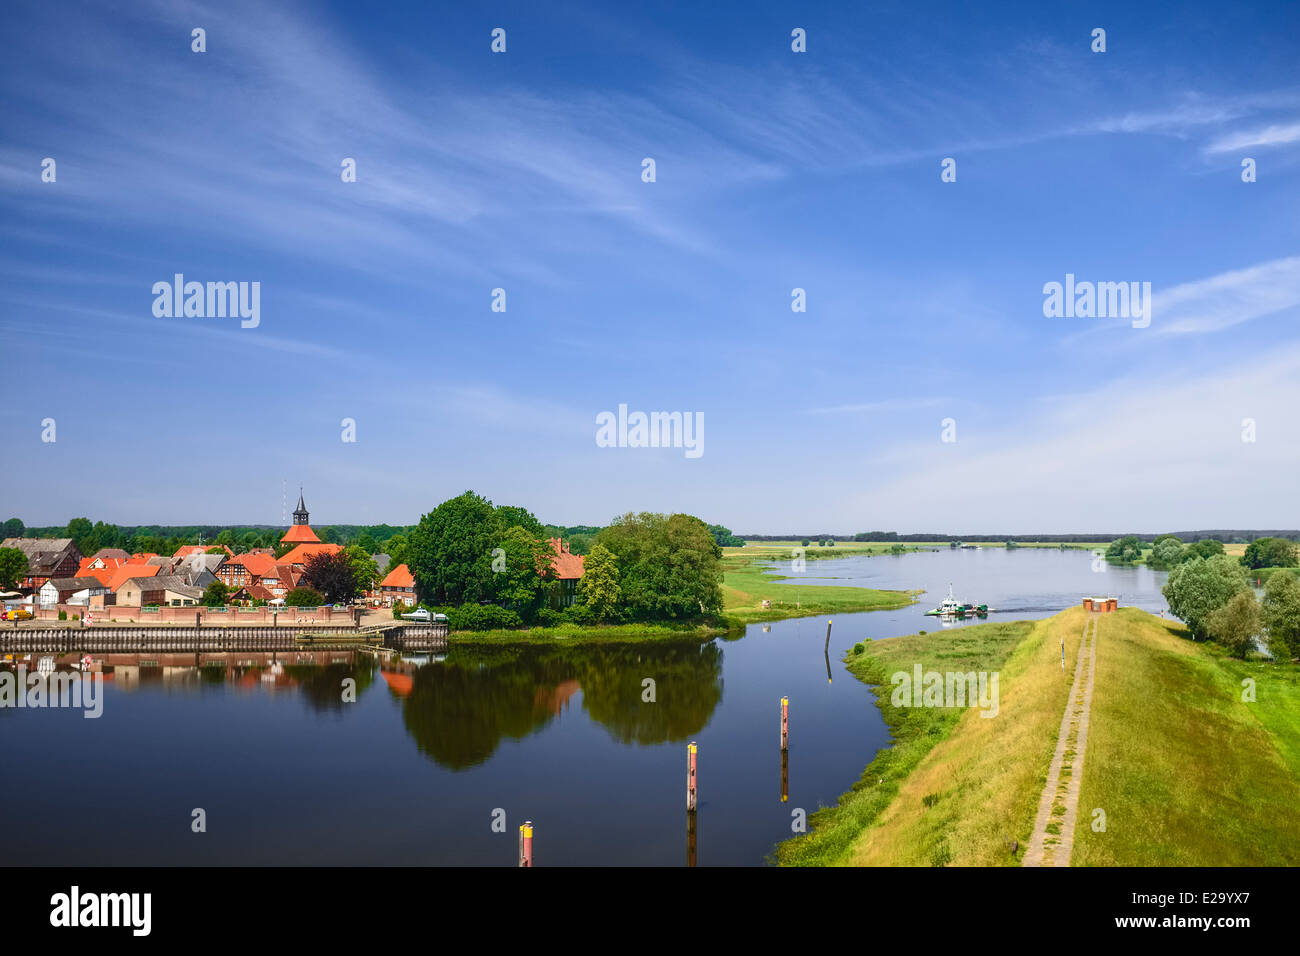 Harbour and outfall of River Aland, Schnackenburg, Lower Saxony, Germany Stock Photo